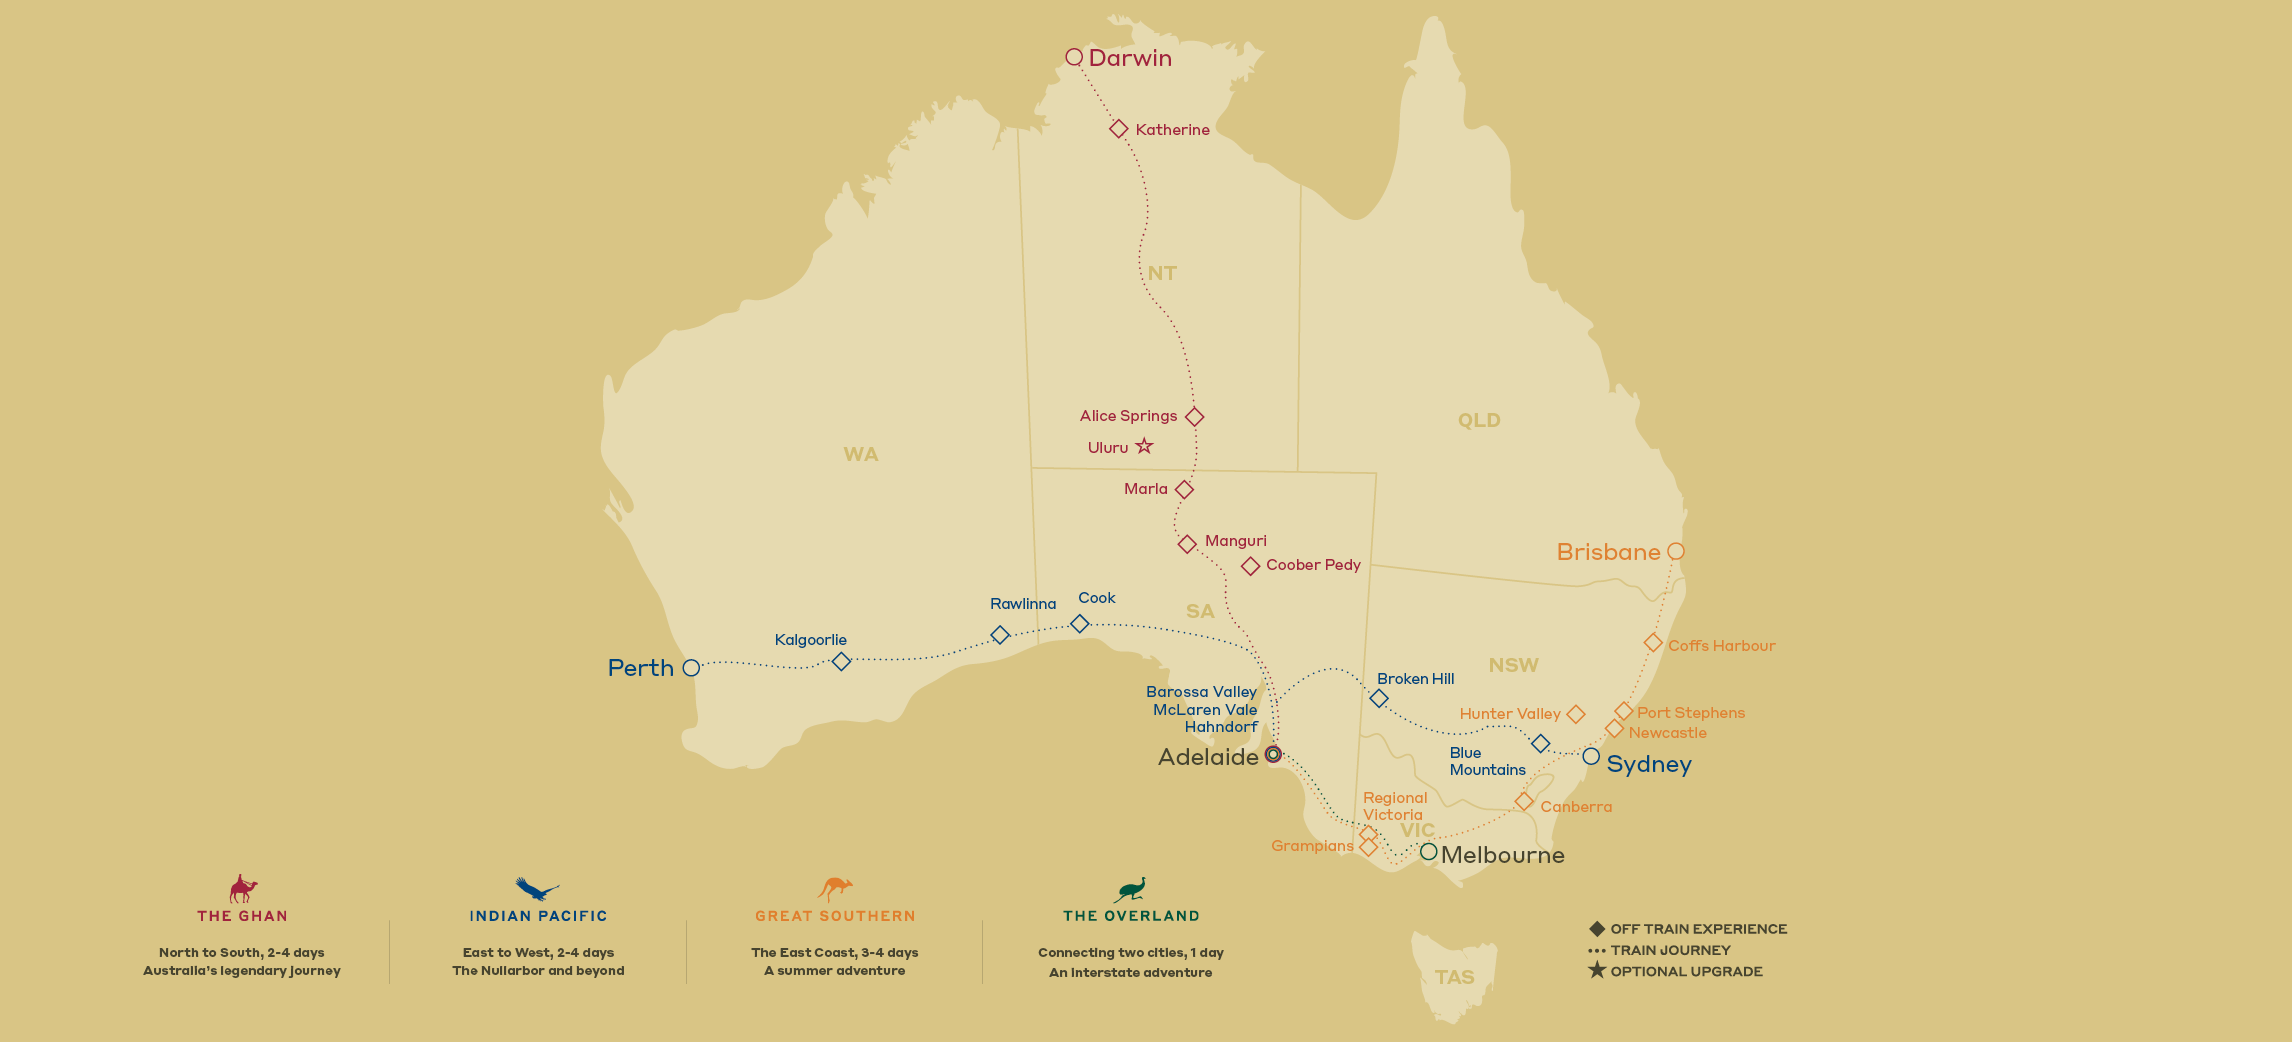 Official Site Of The Ghan, Indian Pacific & Great Southern